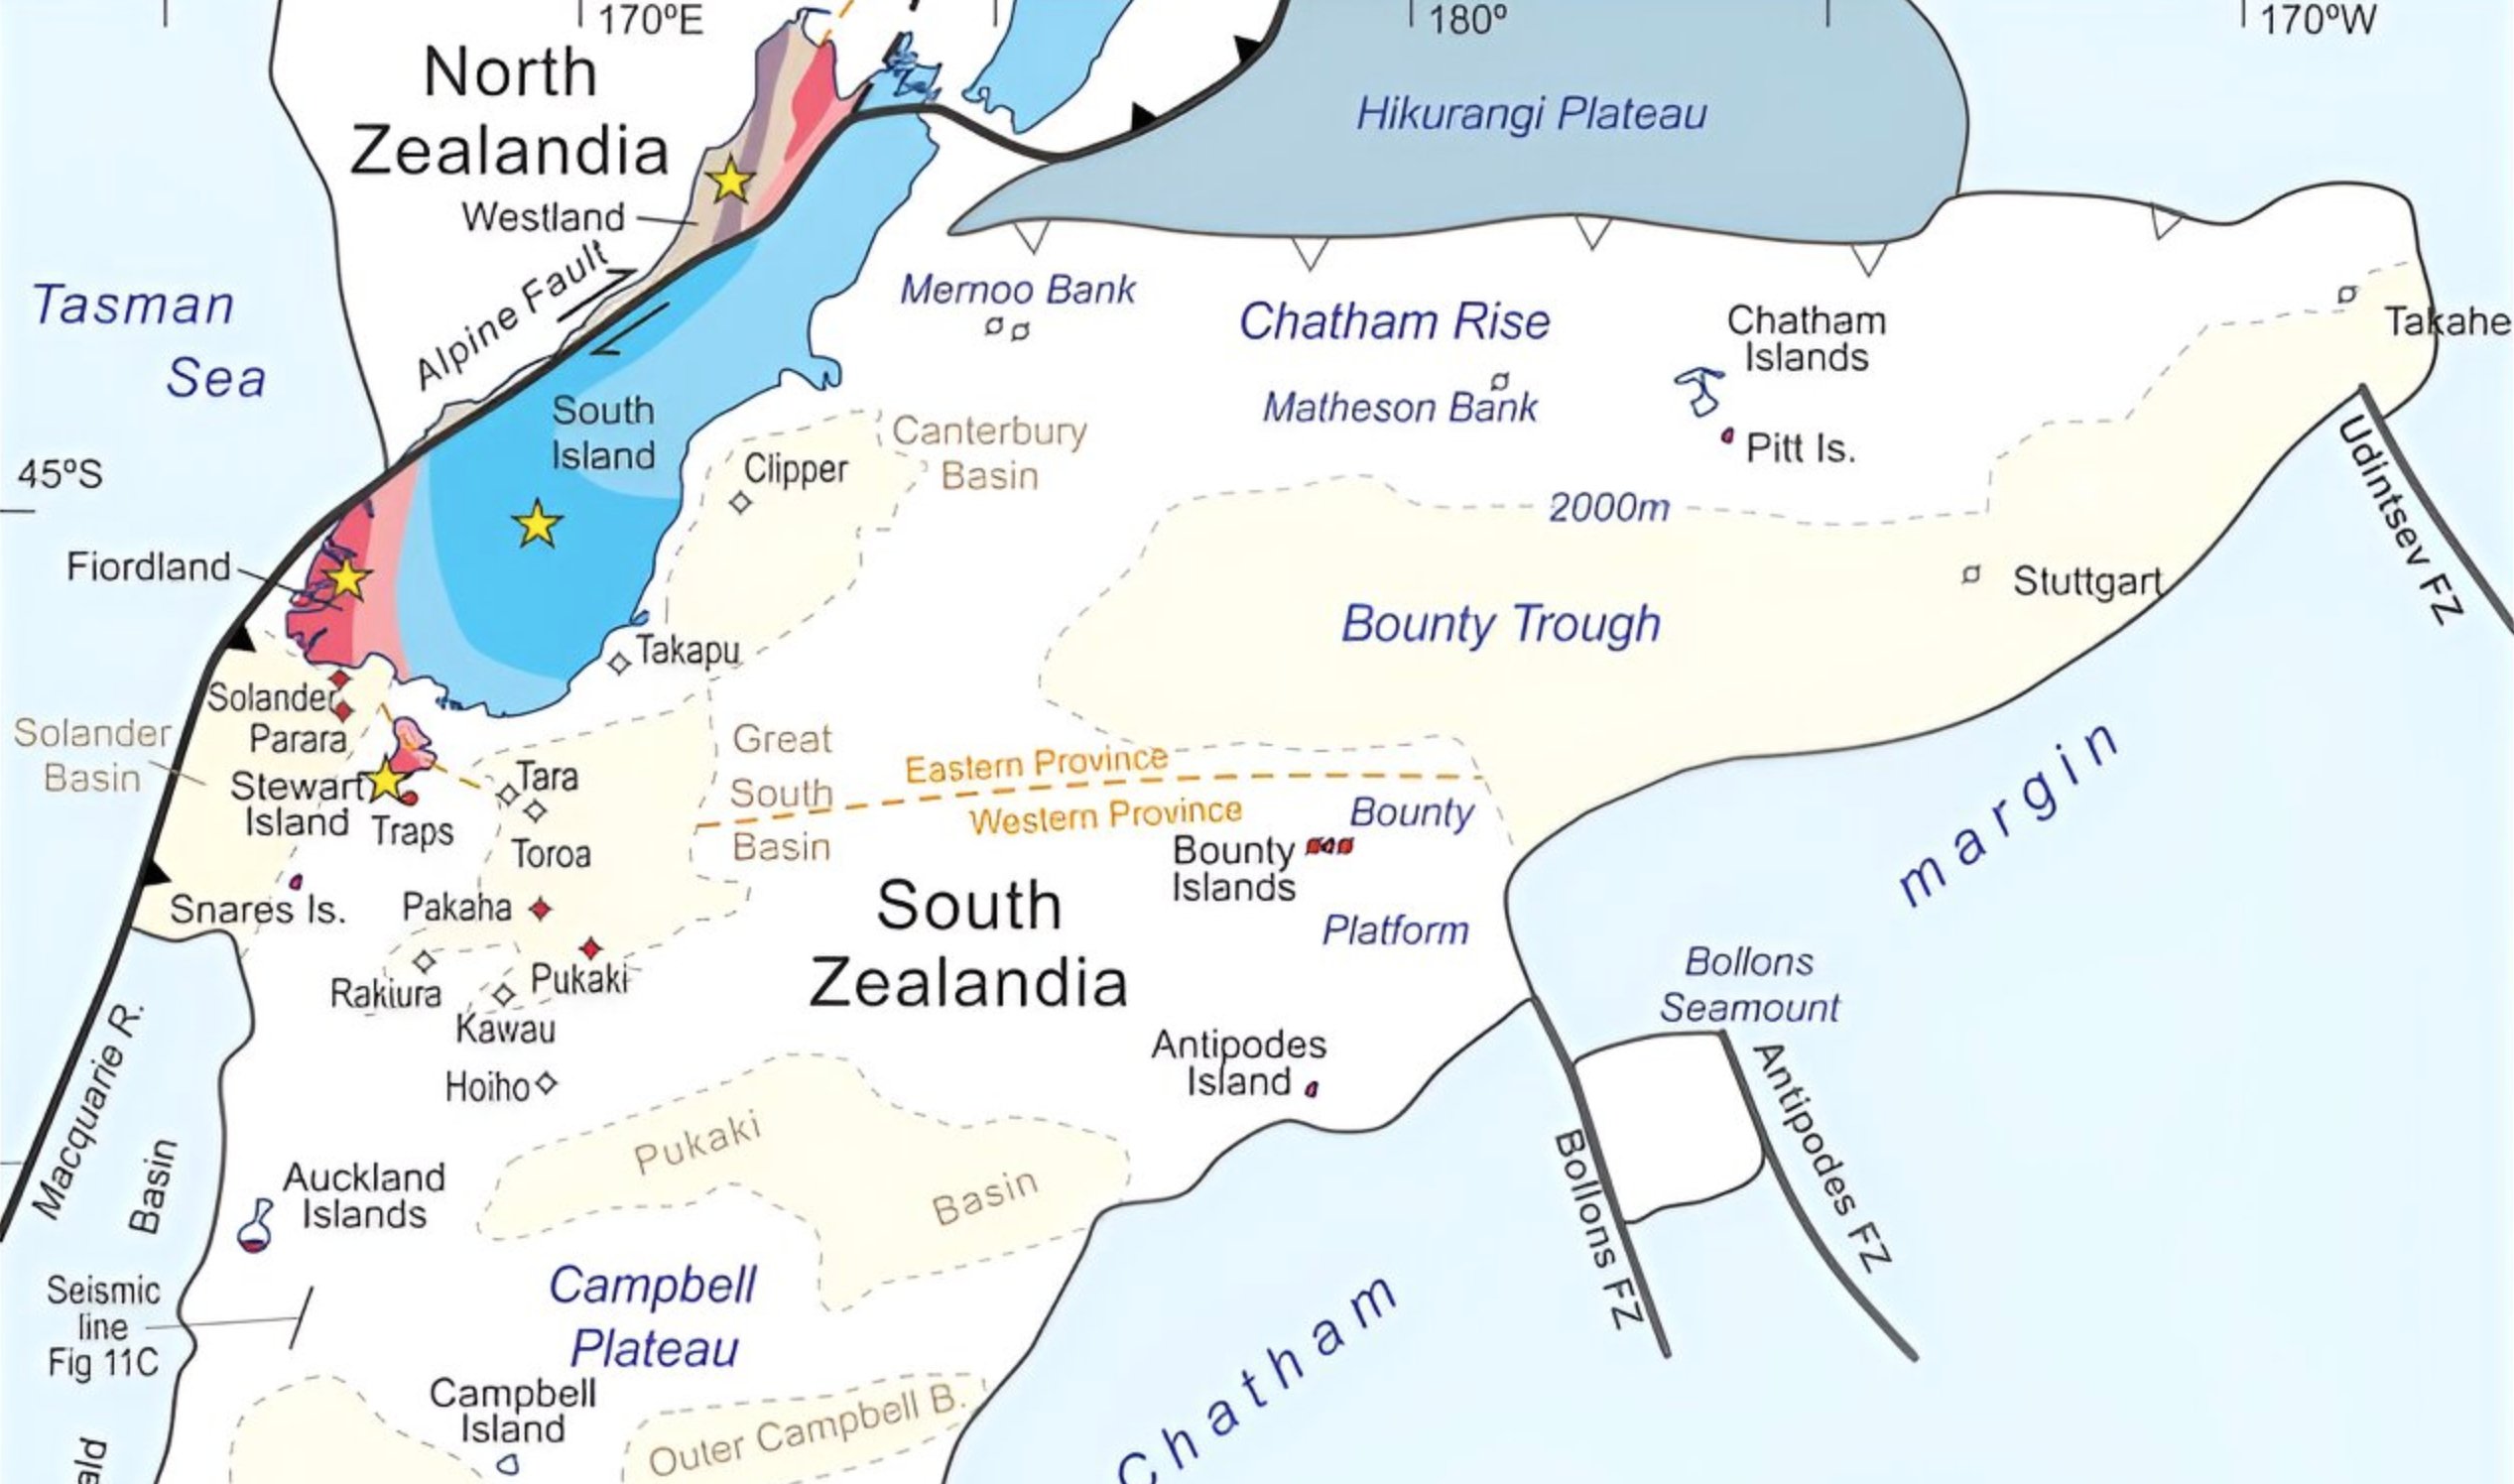 First Geological Map of the lost continent of Zealandia